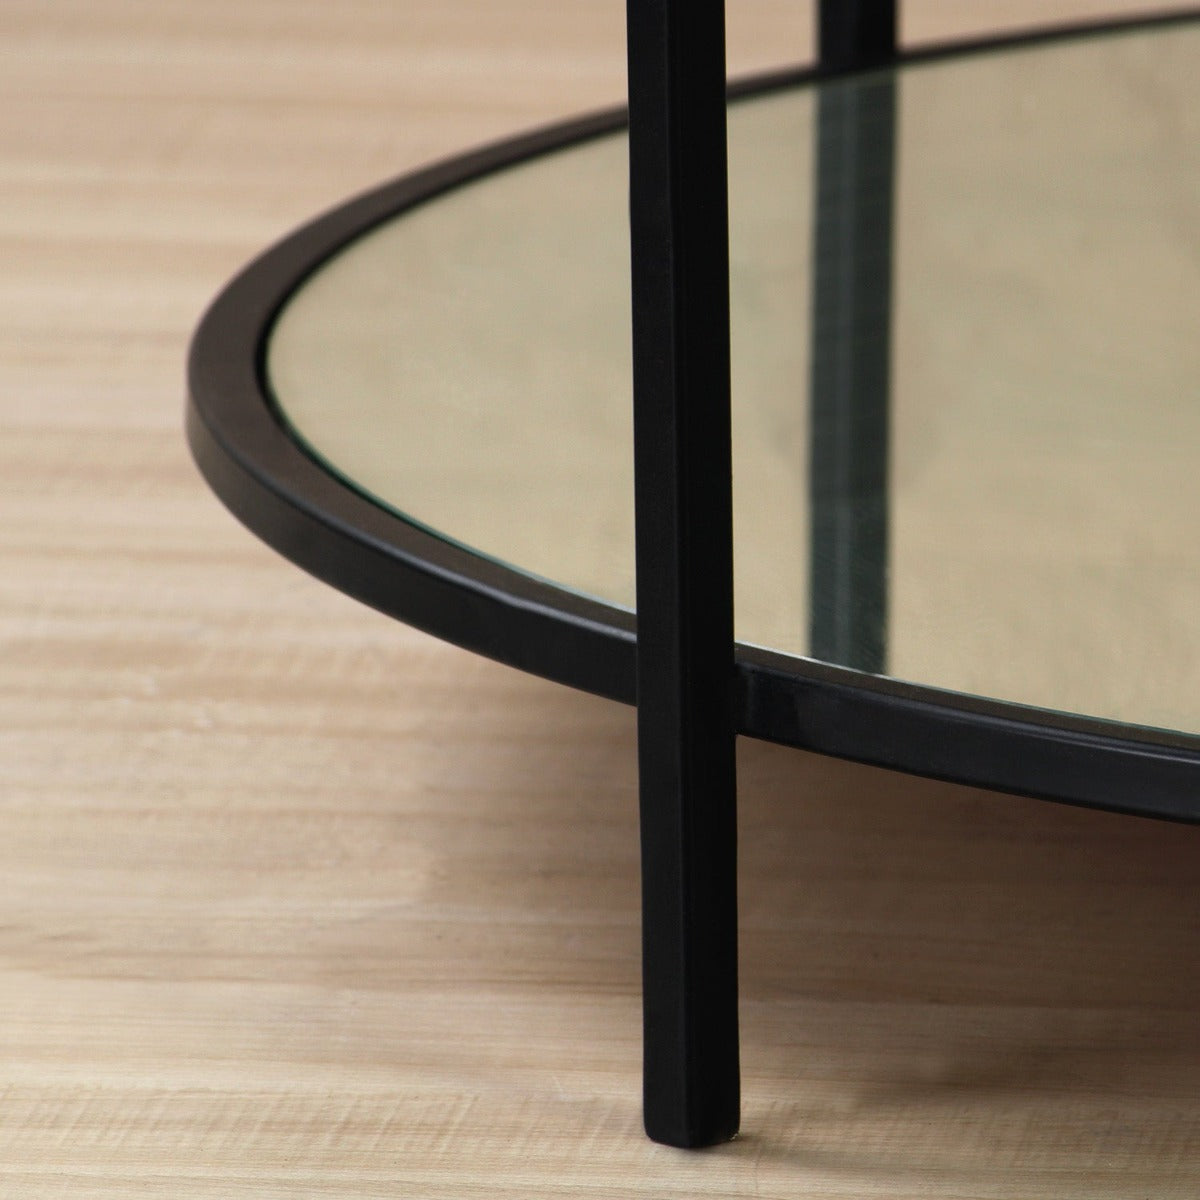 Osby Glass Round Coffee Table In Black Finish